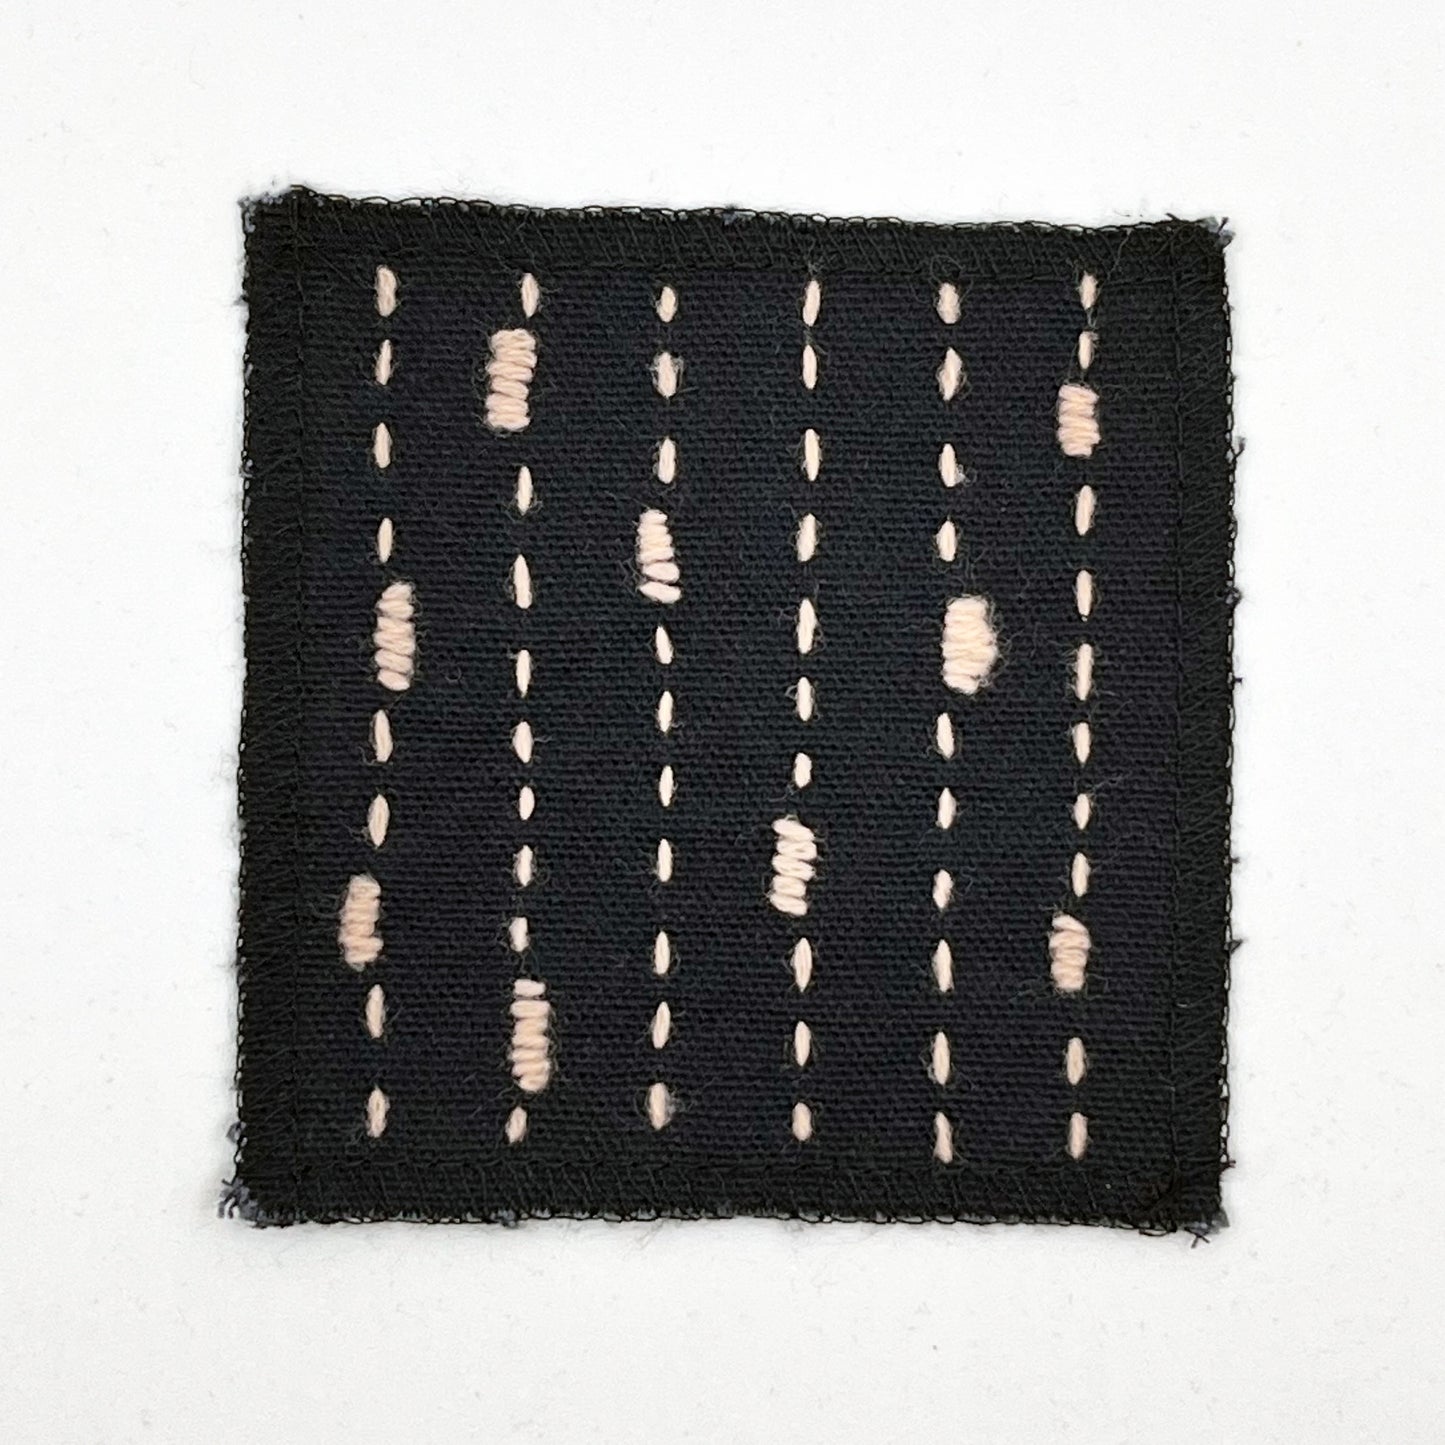 a square patch made out of black canvas, handstitched with peach running stitches with randomly placed small rectangles made of stitches running the other direction, with overlocked edges, on a white background